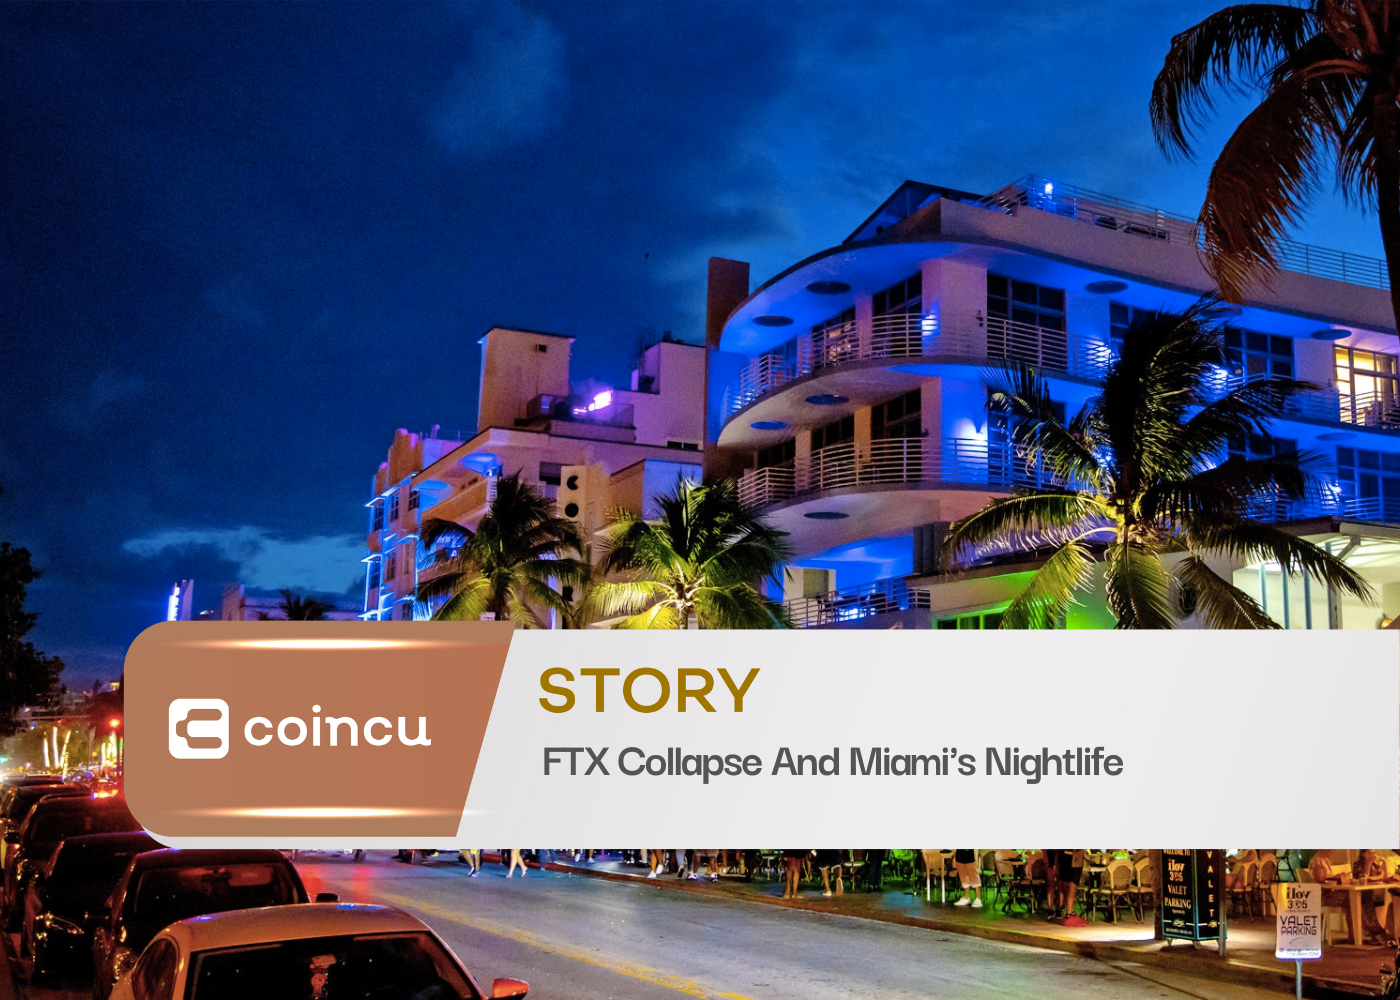 FTX Collapse And Miami's Nightlife